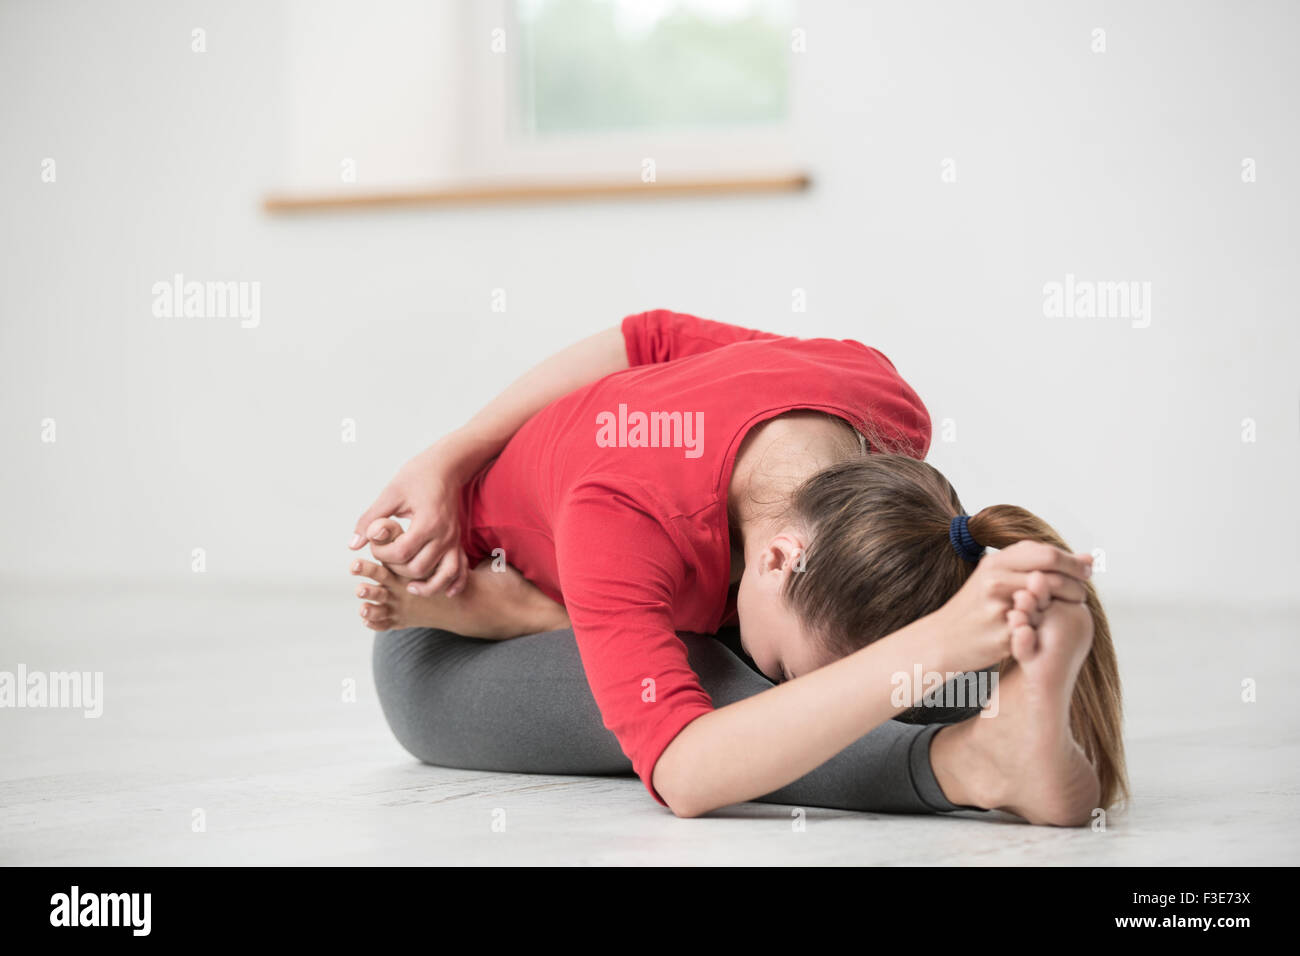 Portrait of a young woman doing stretching exercises in gym Stock Photo